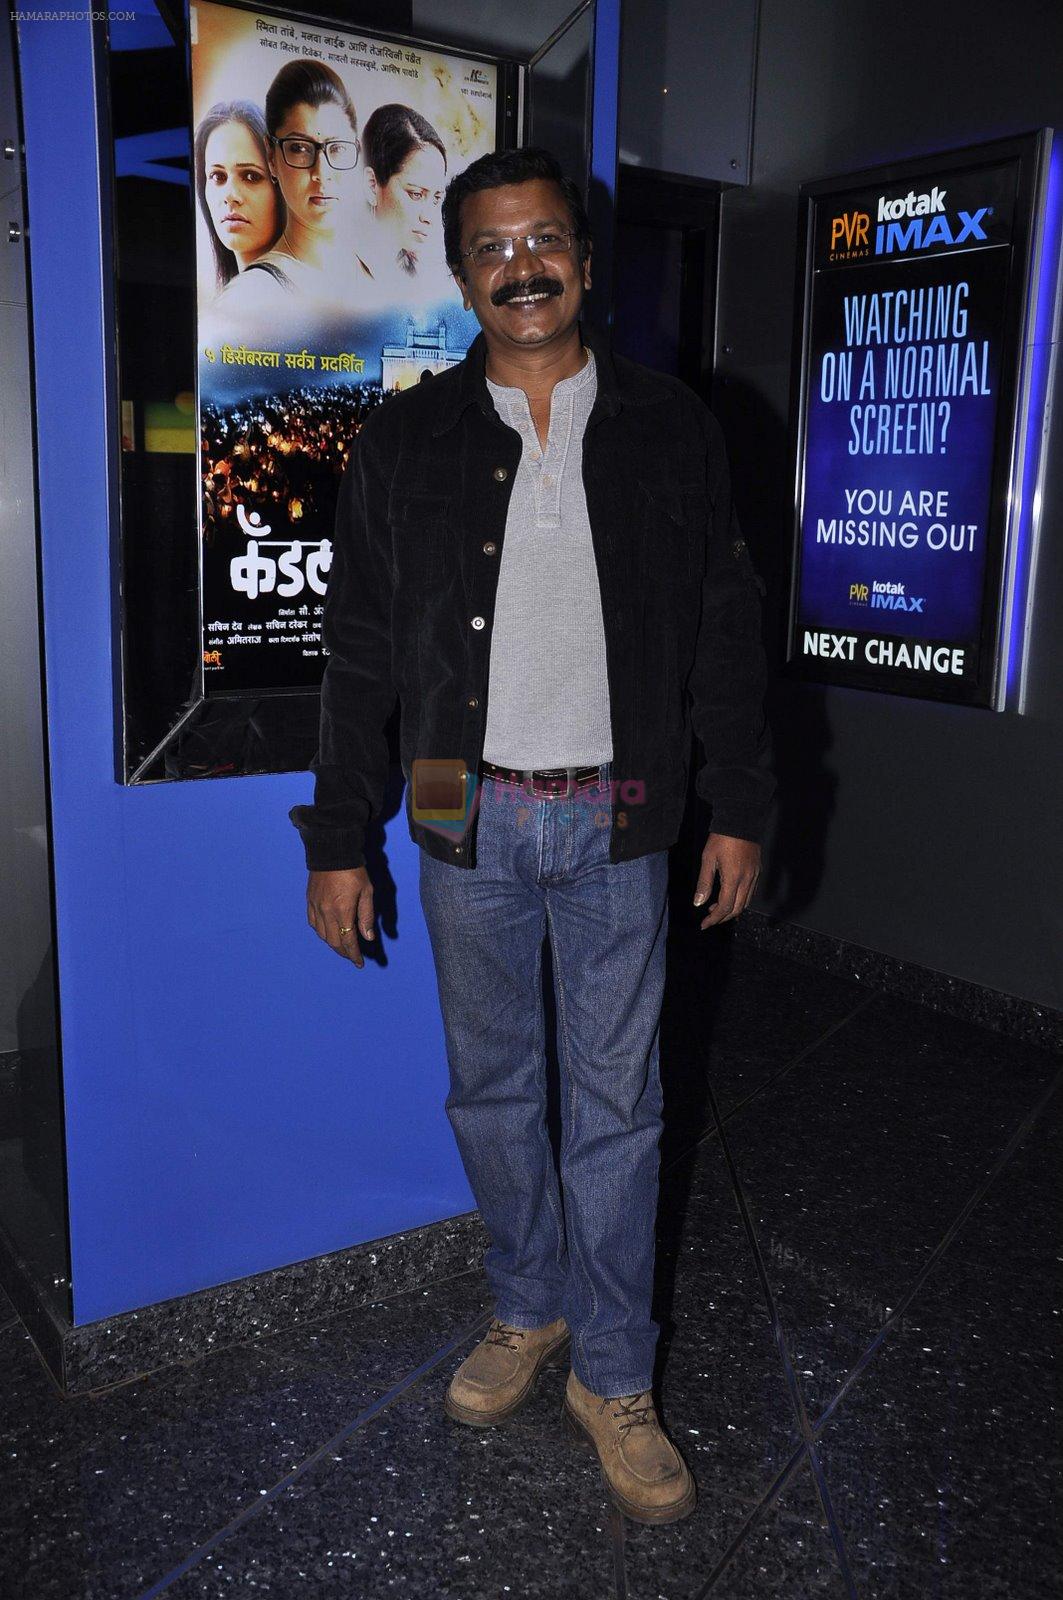 at Candle March film premiere in PVR on 5th Dec 2014